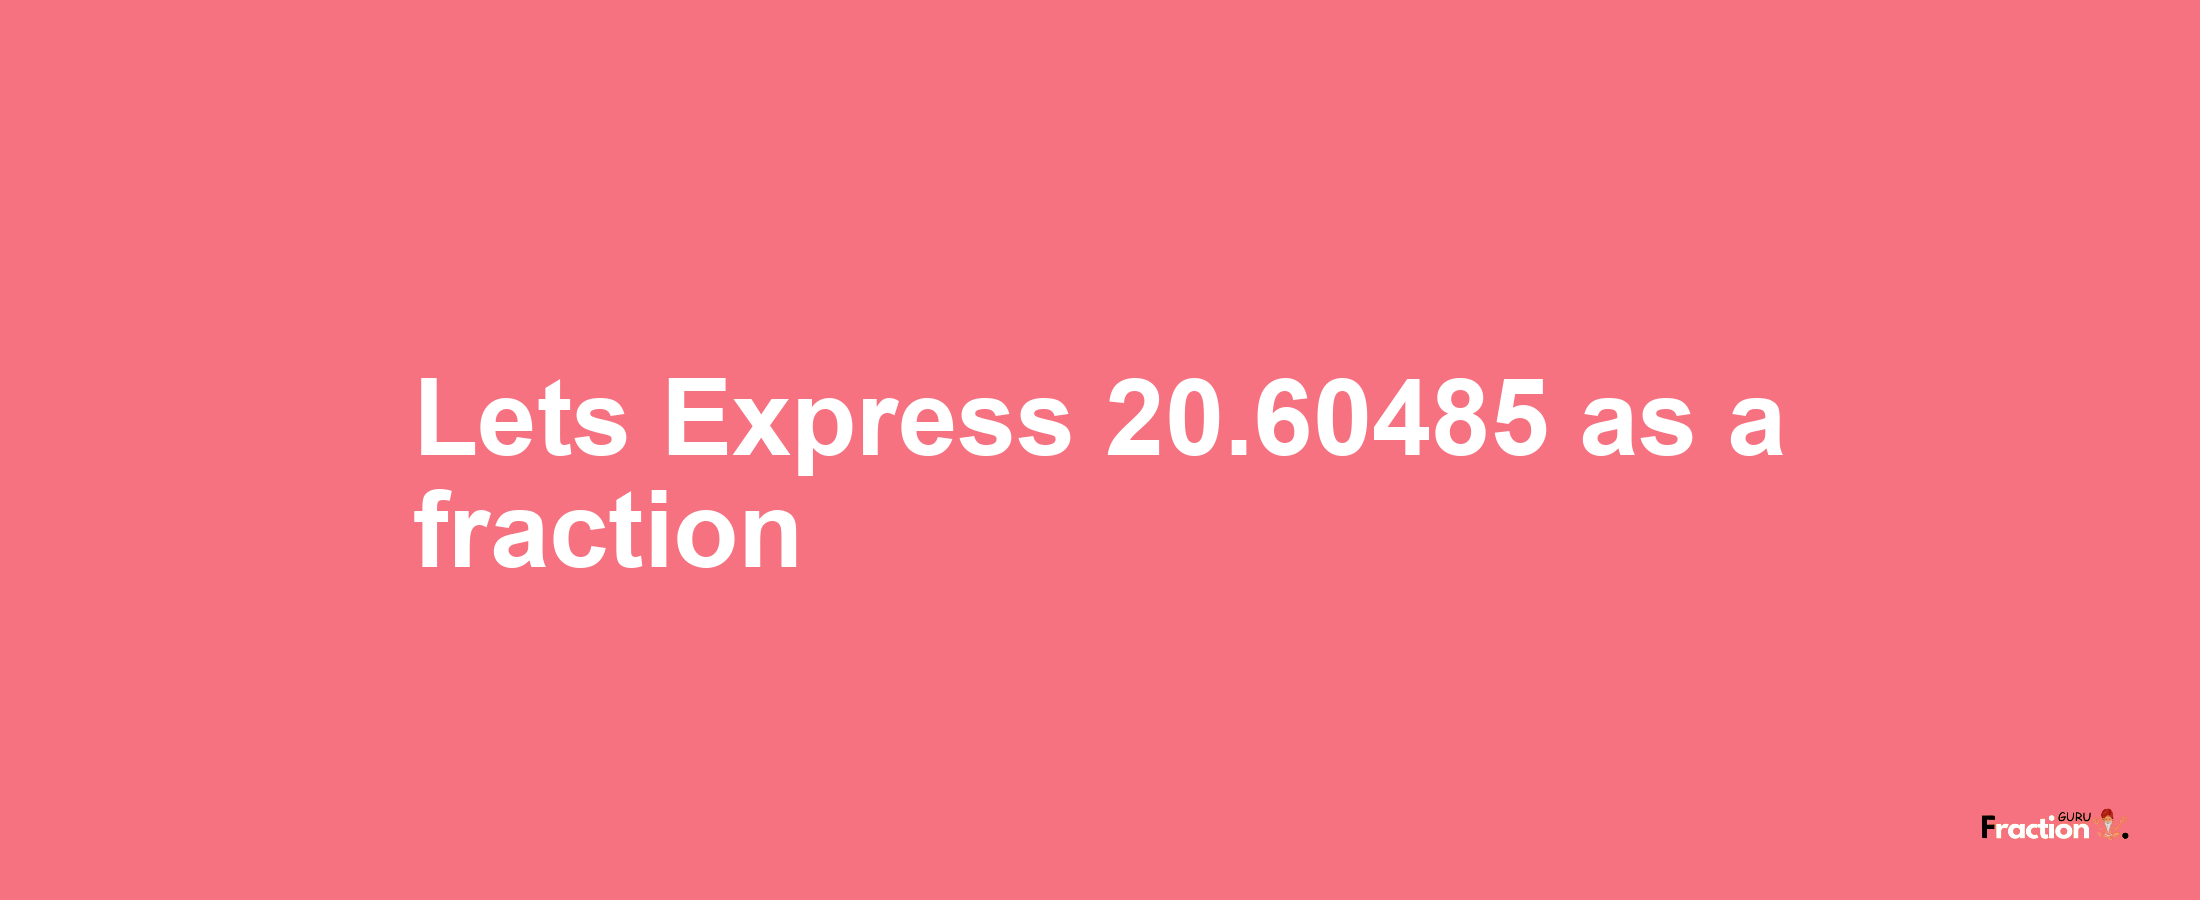 Lets Express 20.60485 as afraction